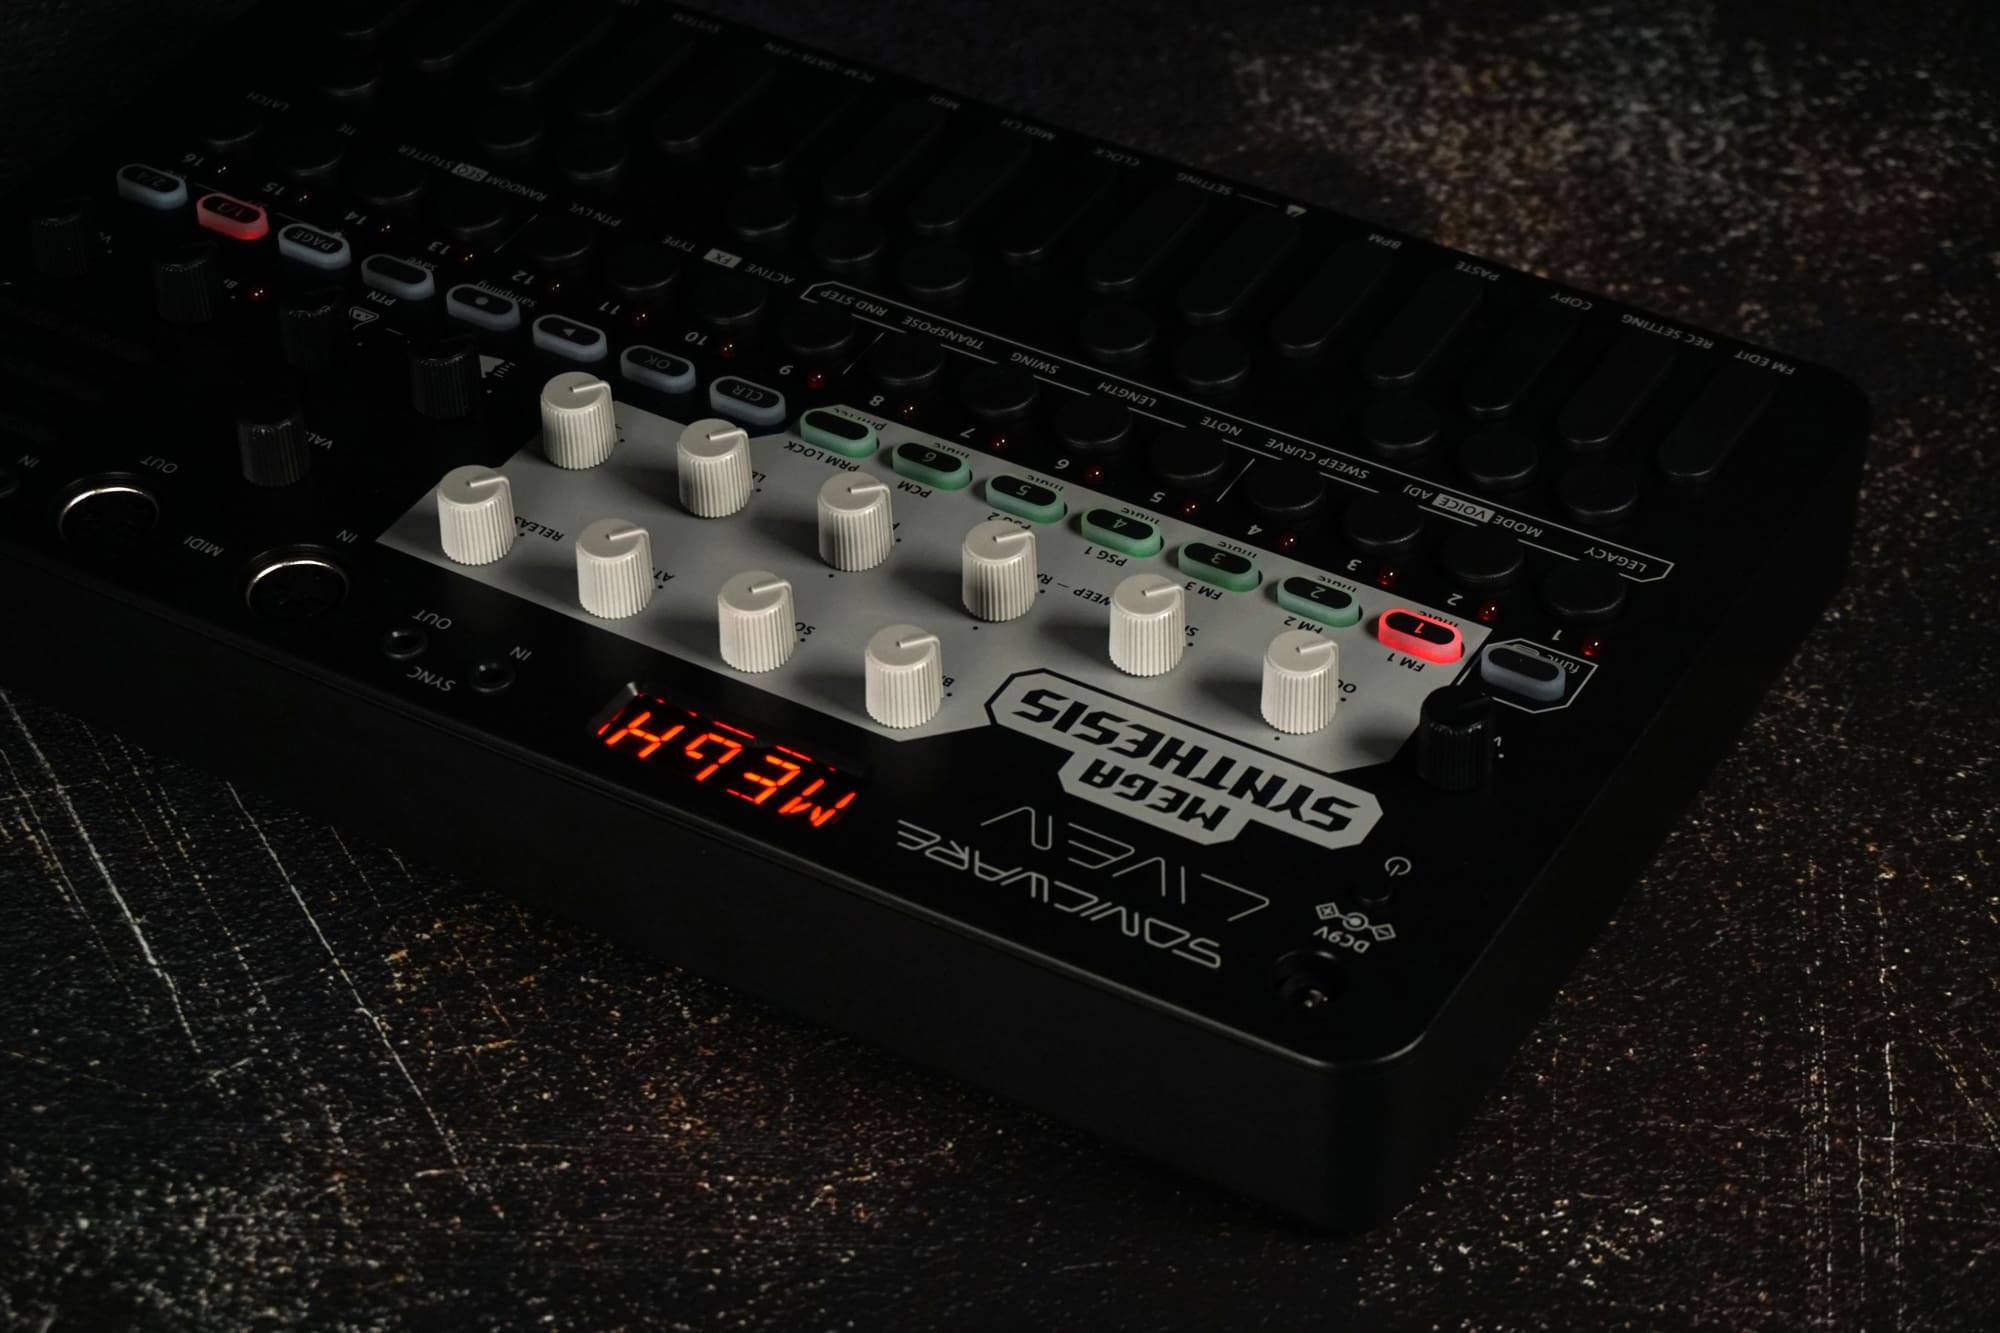 Relive the '80s with the Korg Volca FM synthesizer